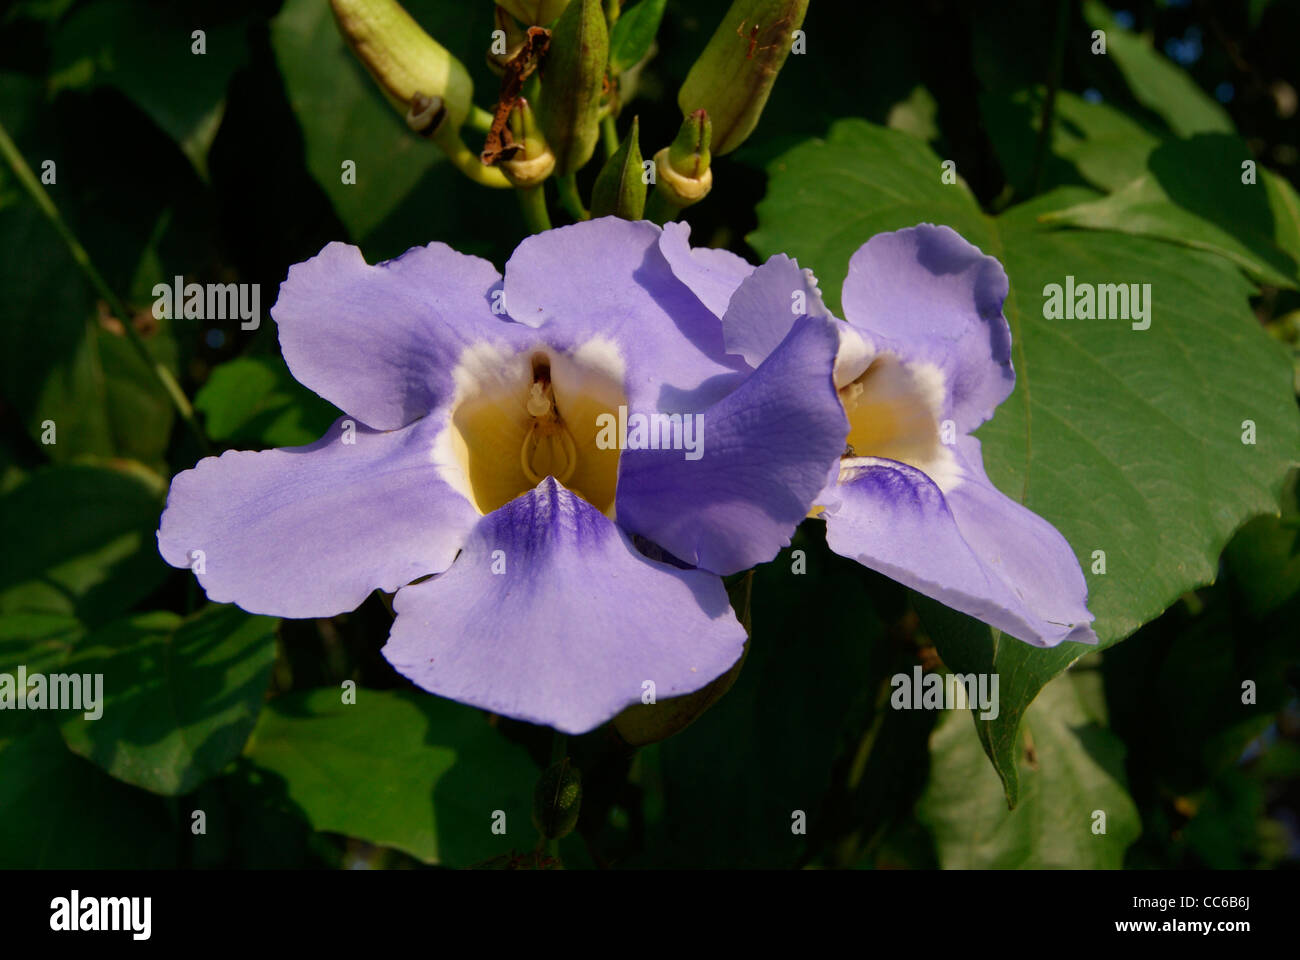 Violet domestic flower having middle open pit. Stock Photo